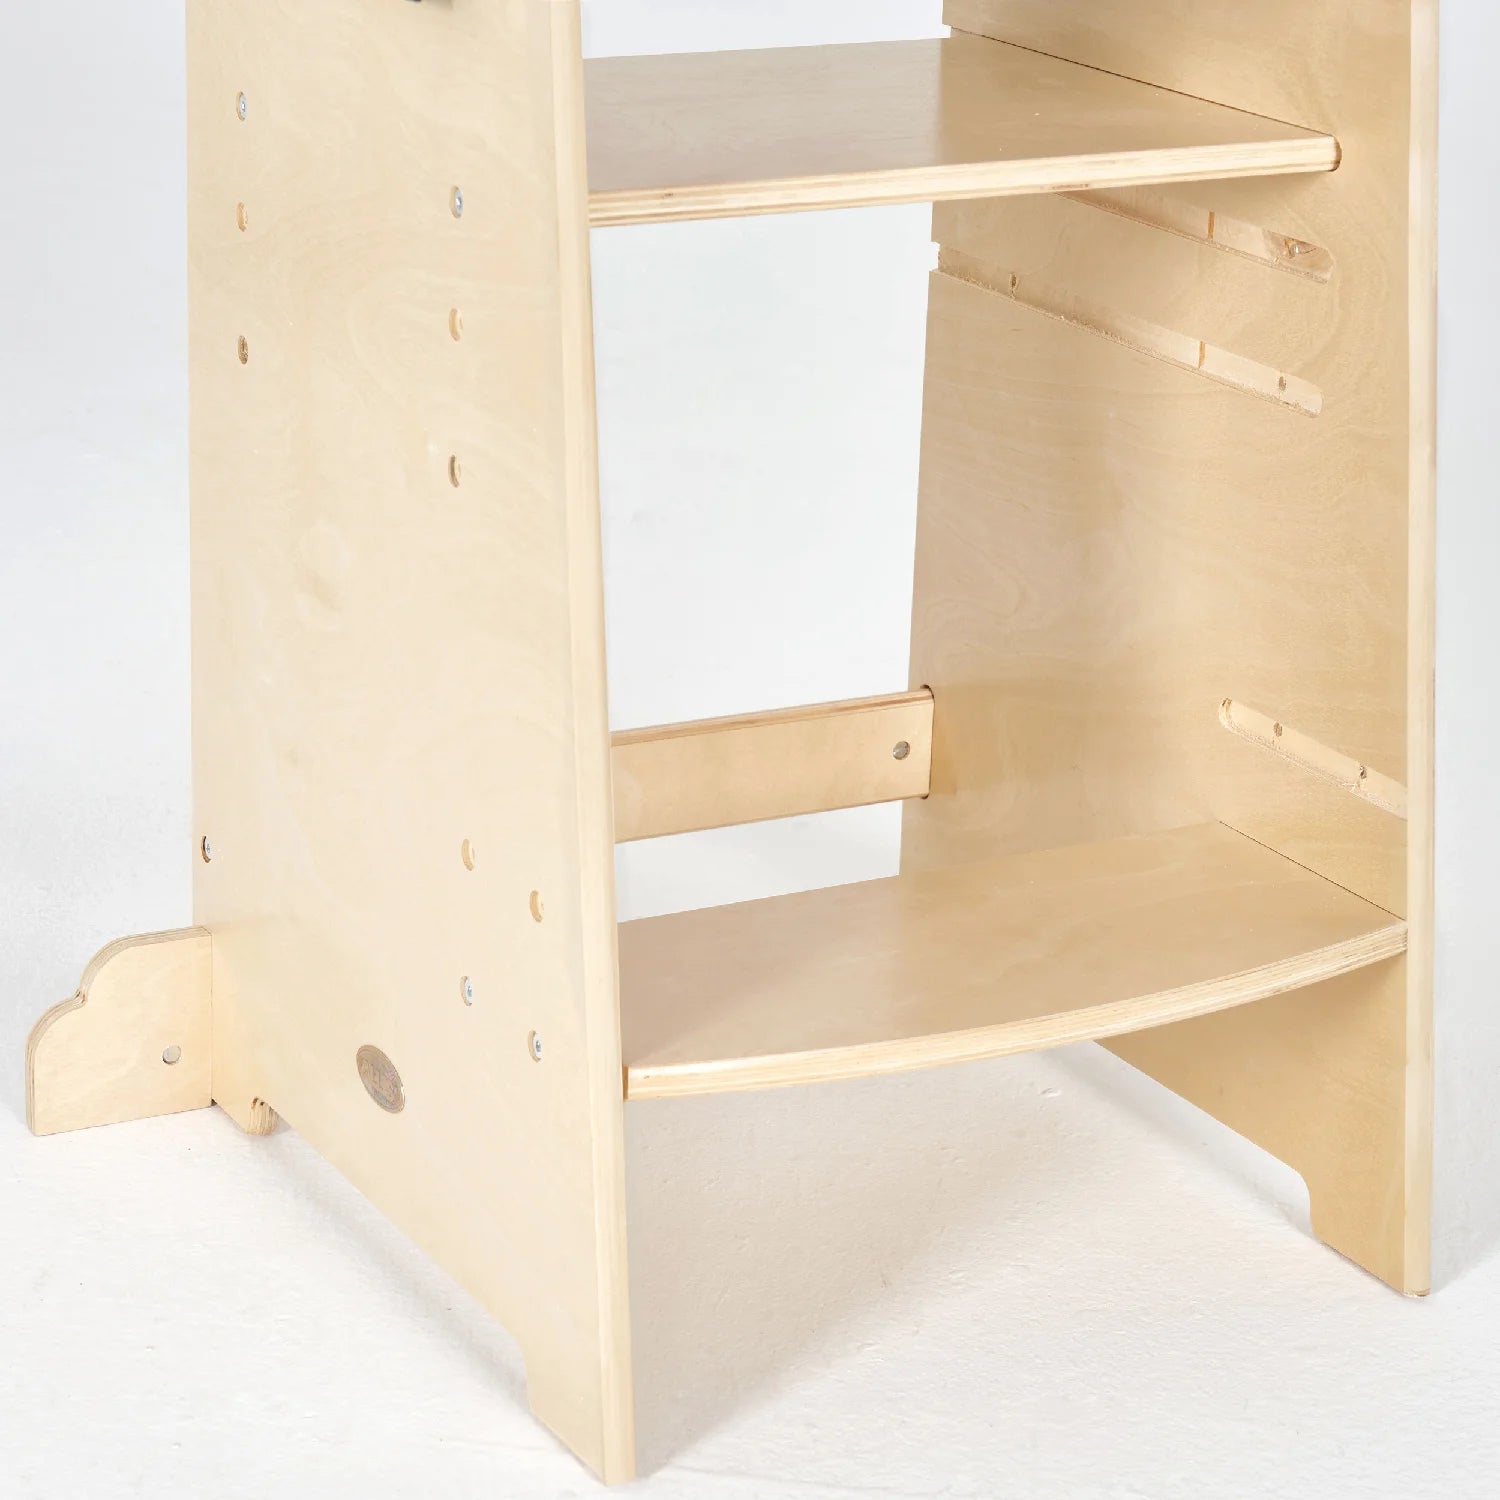 adjustable height for toddler learning tower